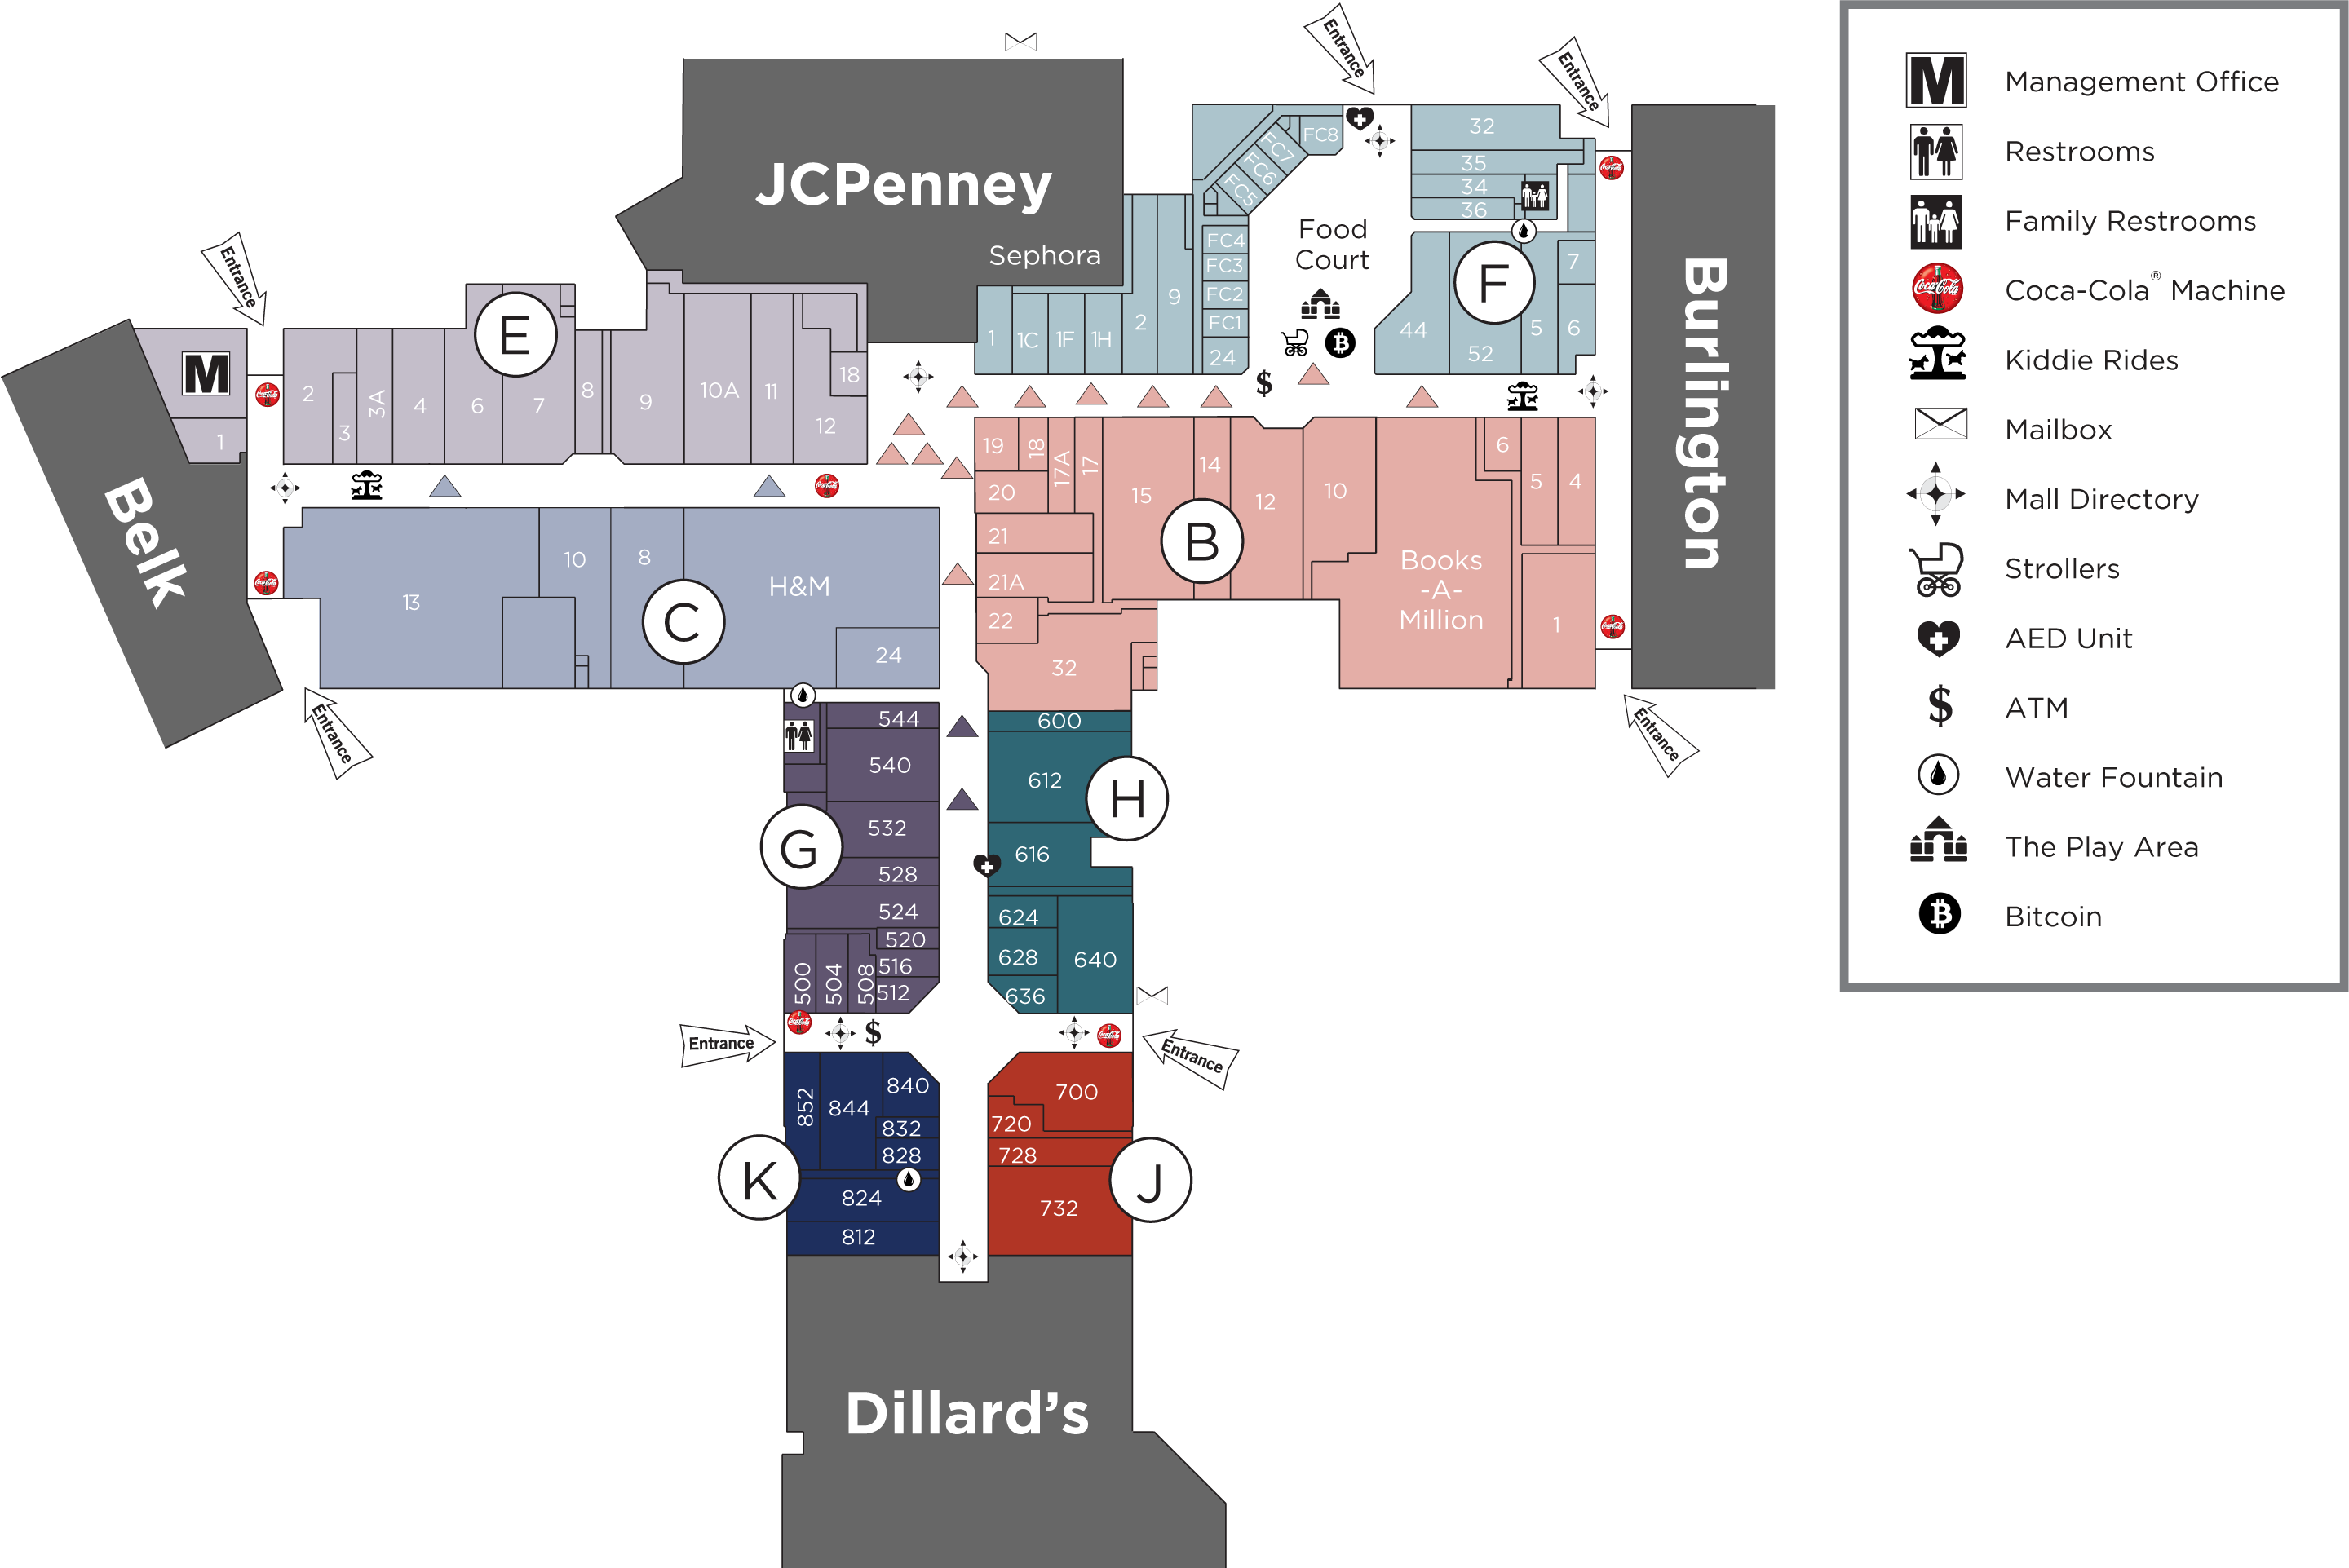 Northwoods Mall directory map